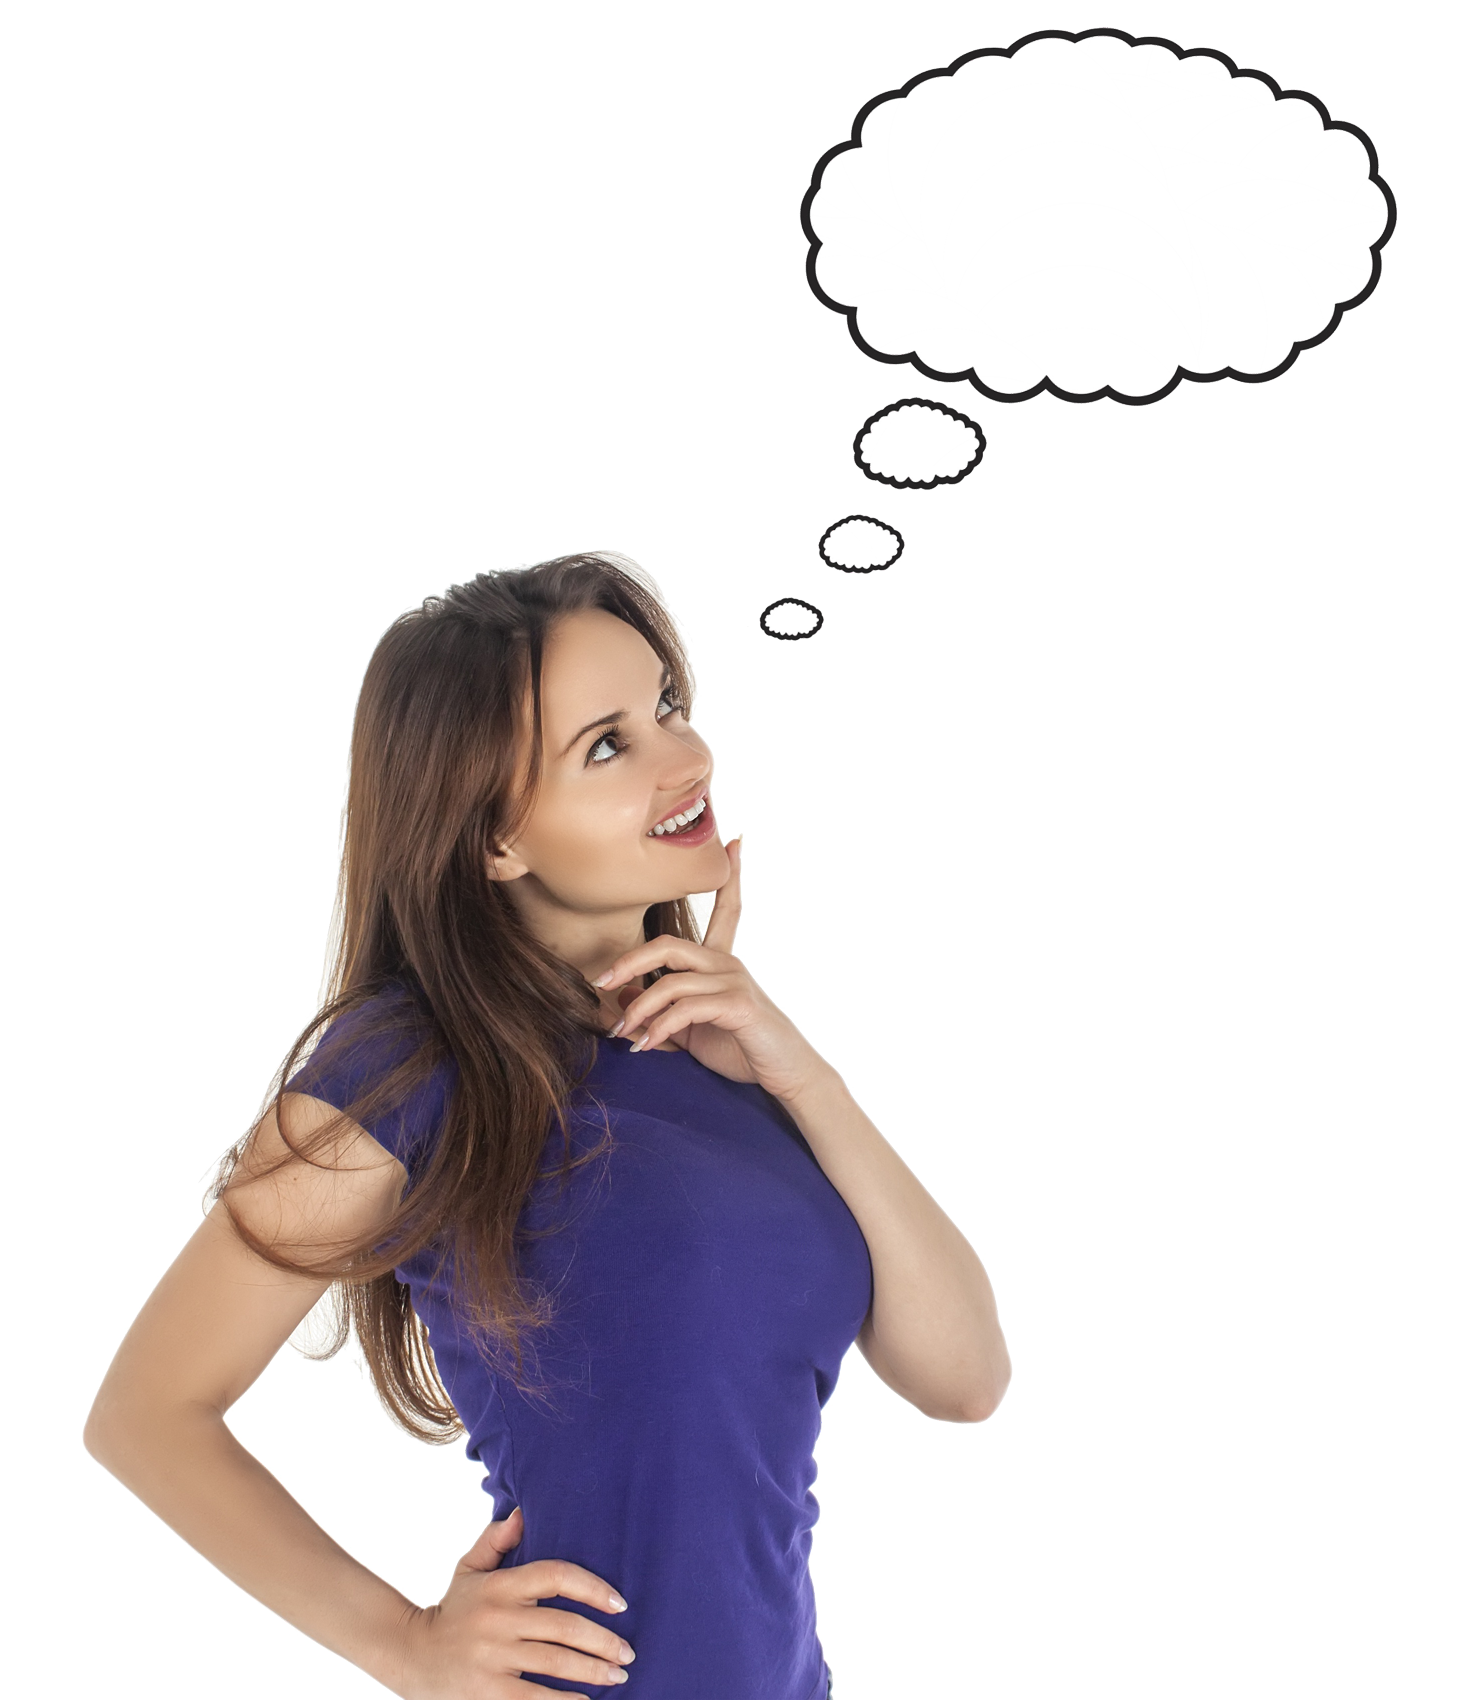 Person Thinking PNG HD - 131406